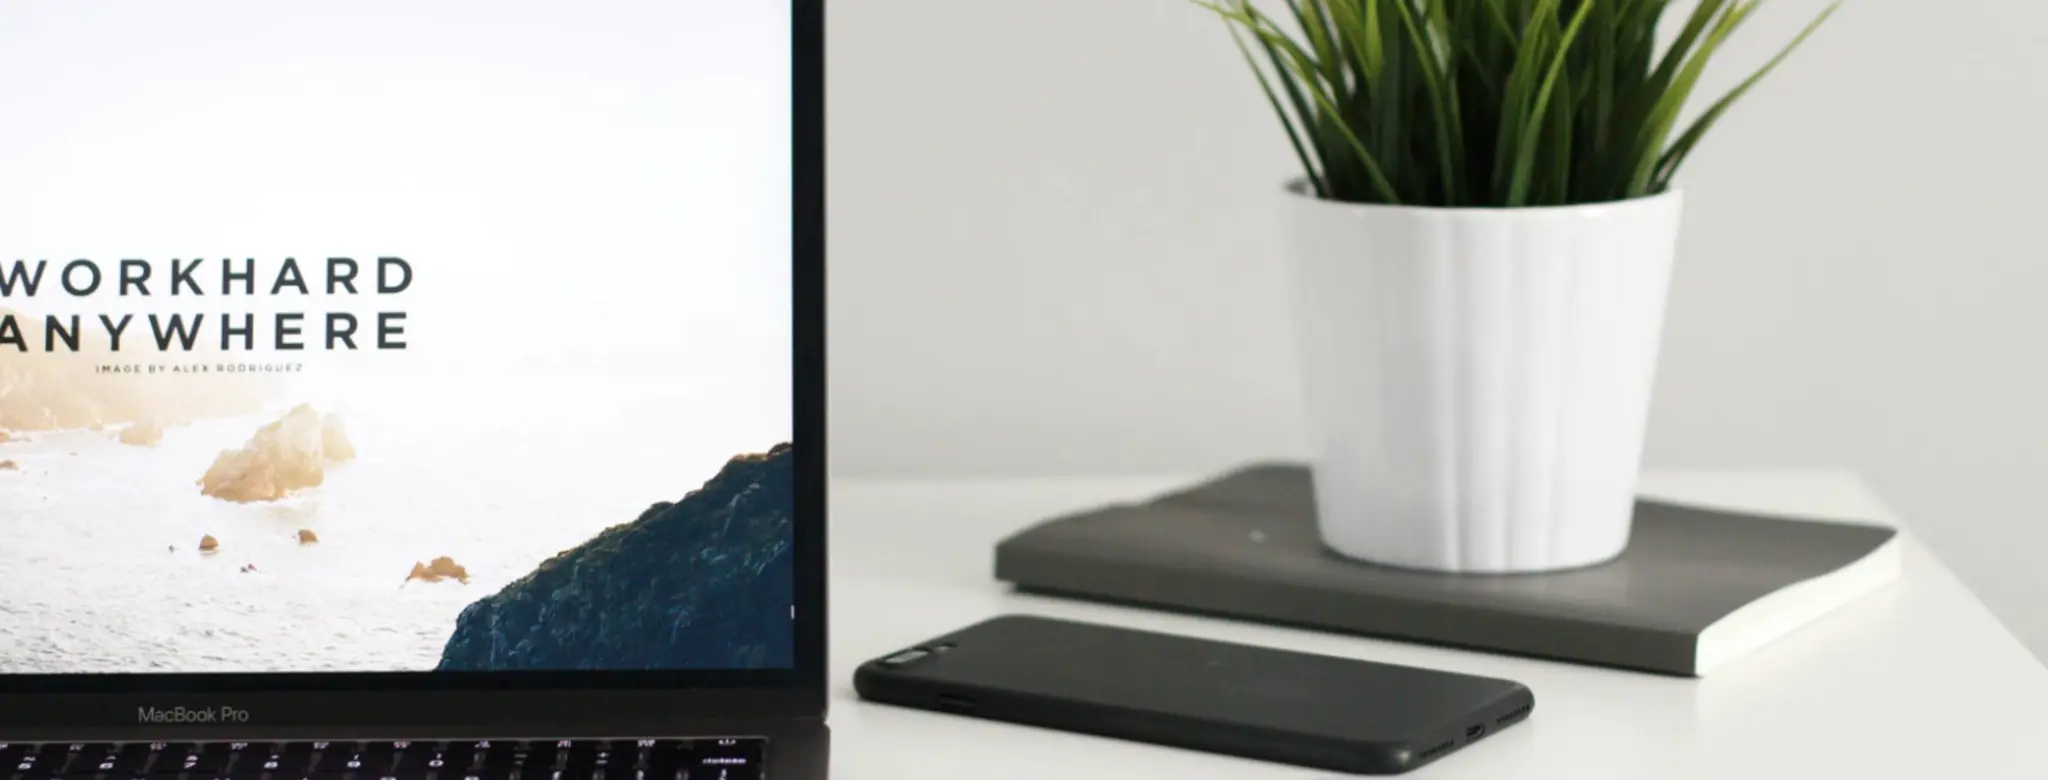 laptop on desk with plant